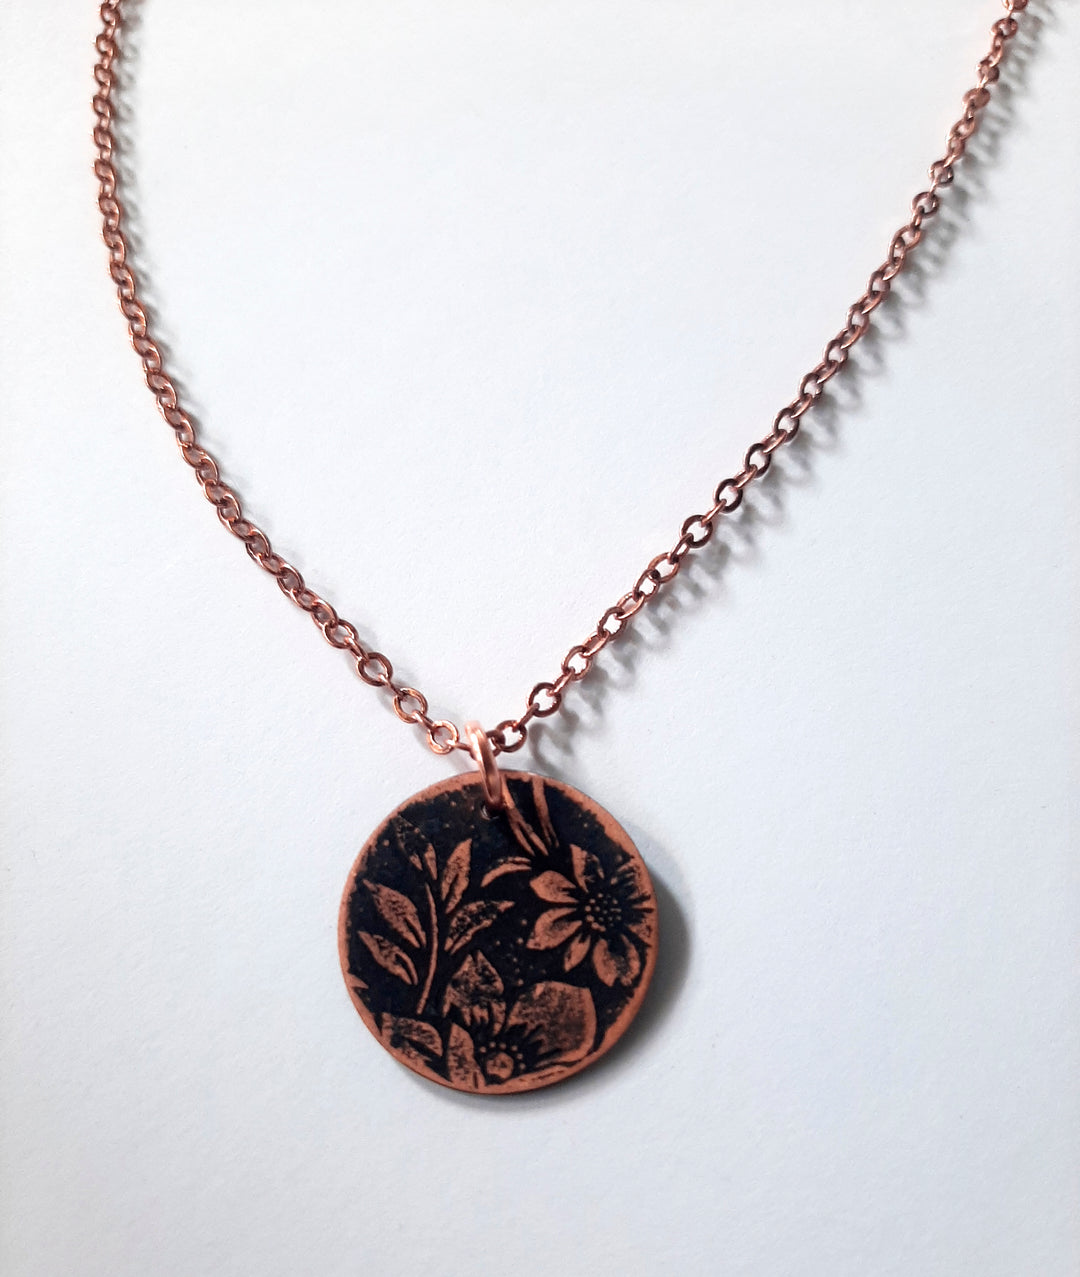 Floral Coin Amulet (Flower and Fern)